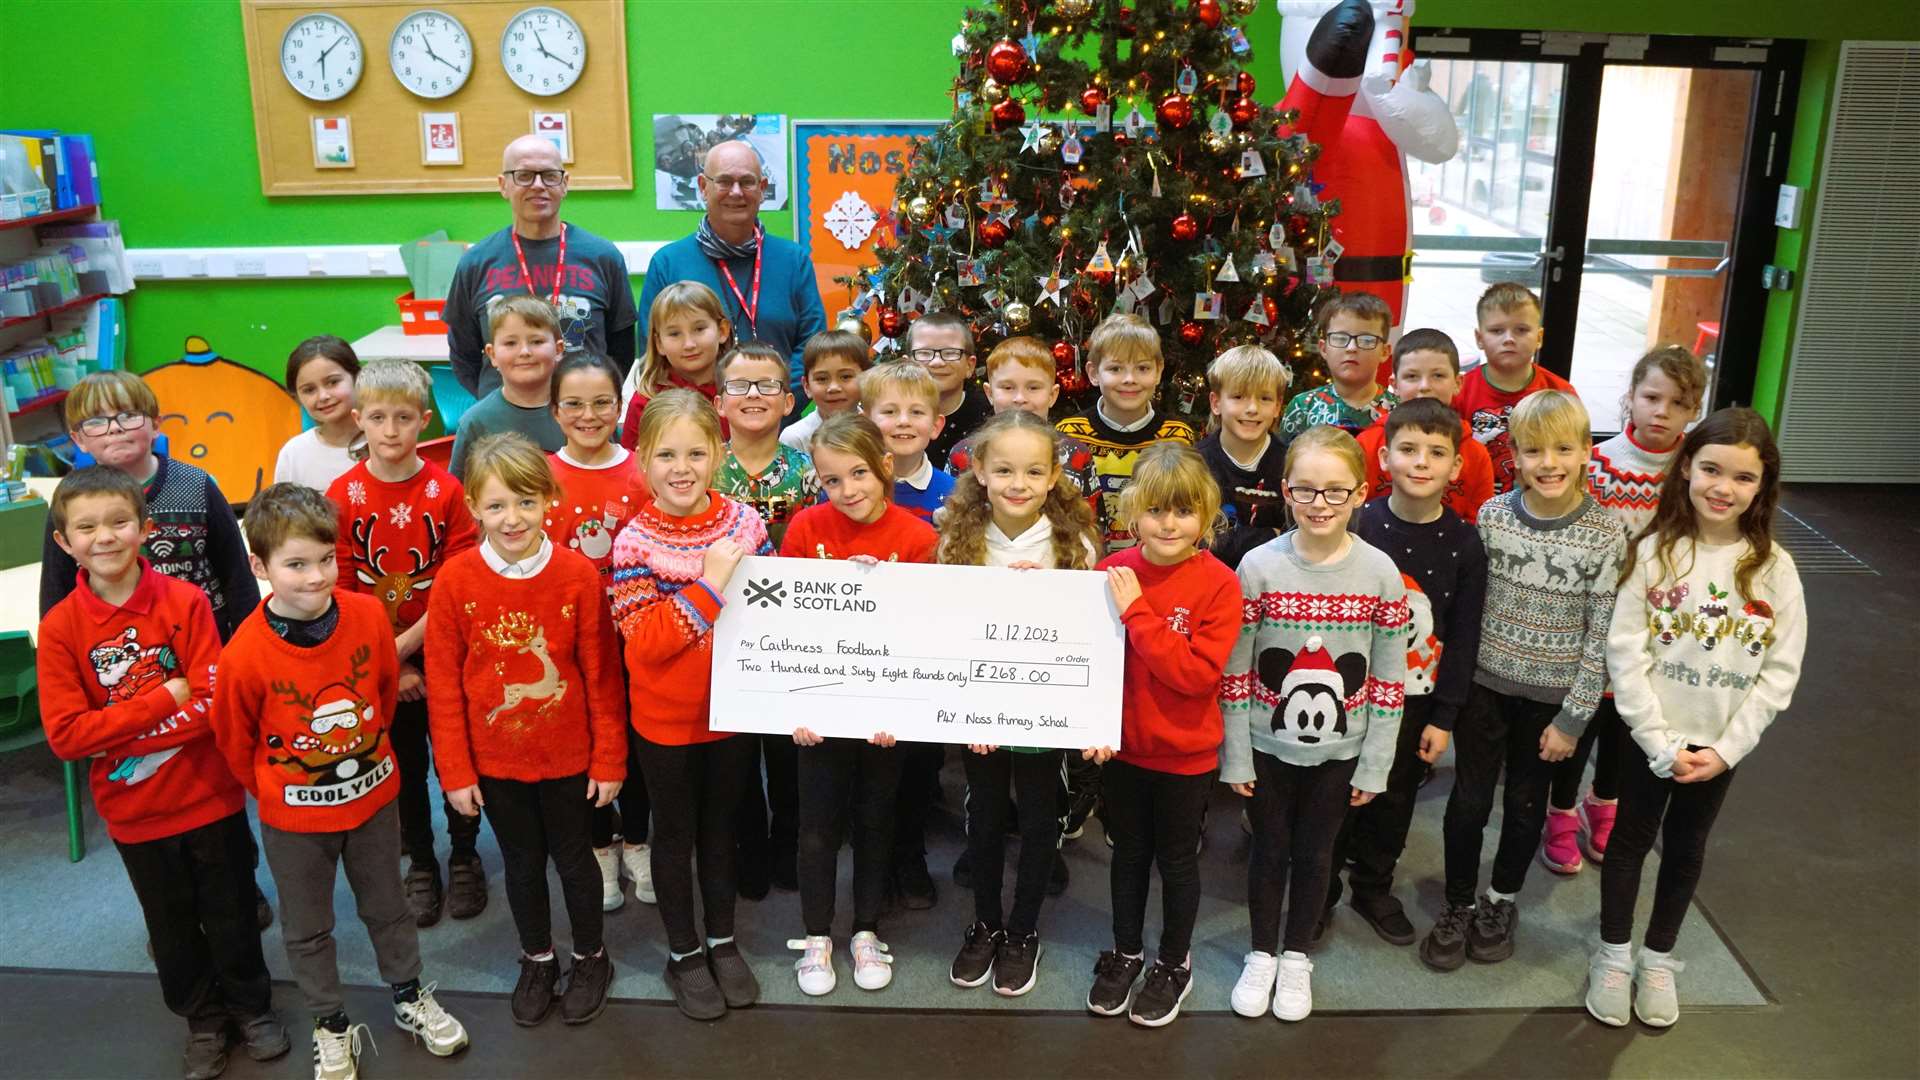 Primary 4 Yellow from Noss Primary School raised £268 from selling reindeer dust. At the rear are Grant Ramsay and David Miller from Caithness Foodbank. Picture: DGS